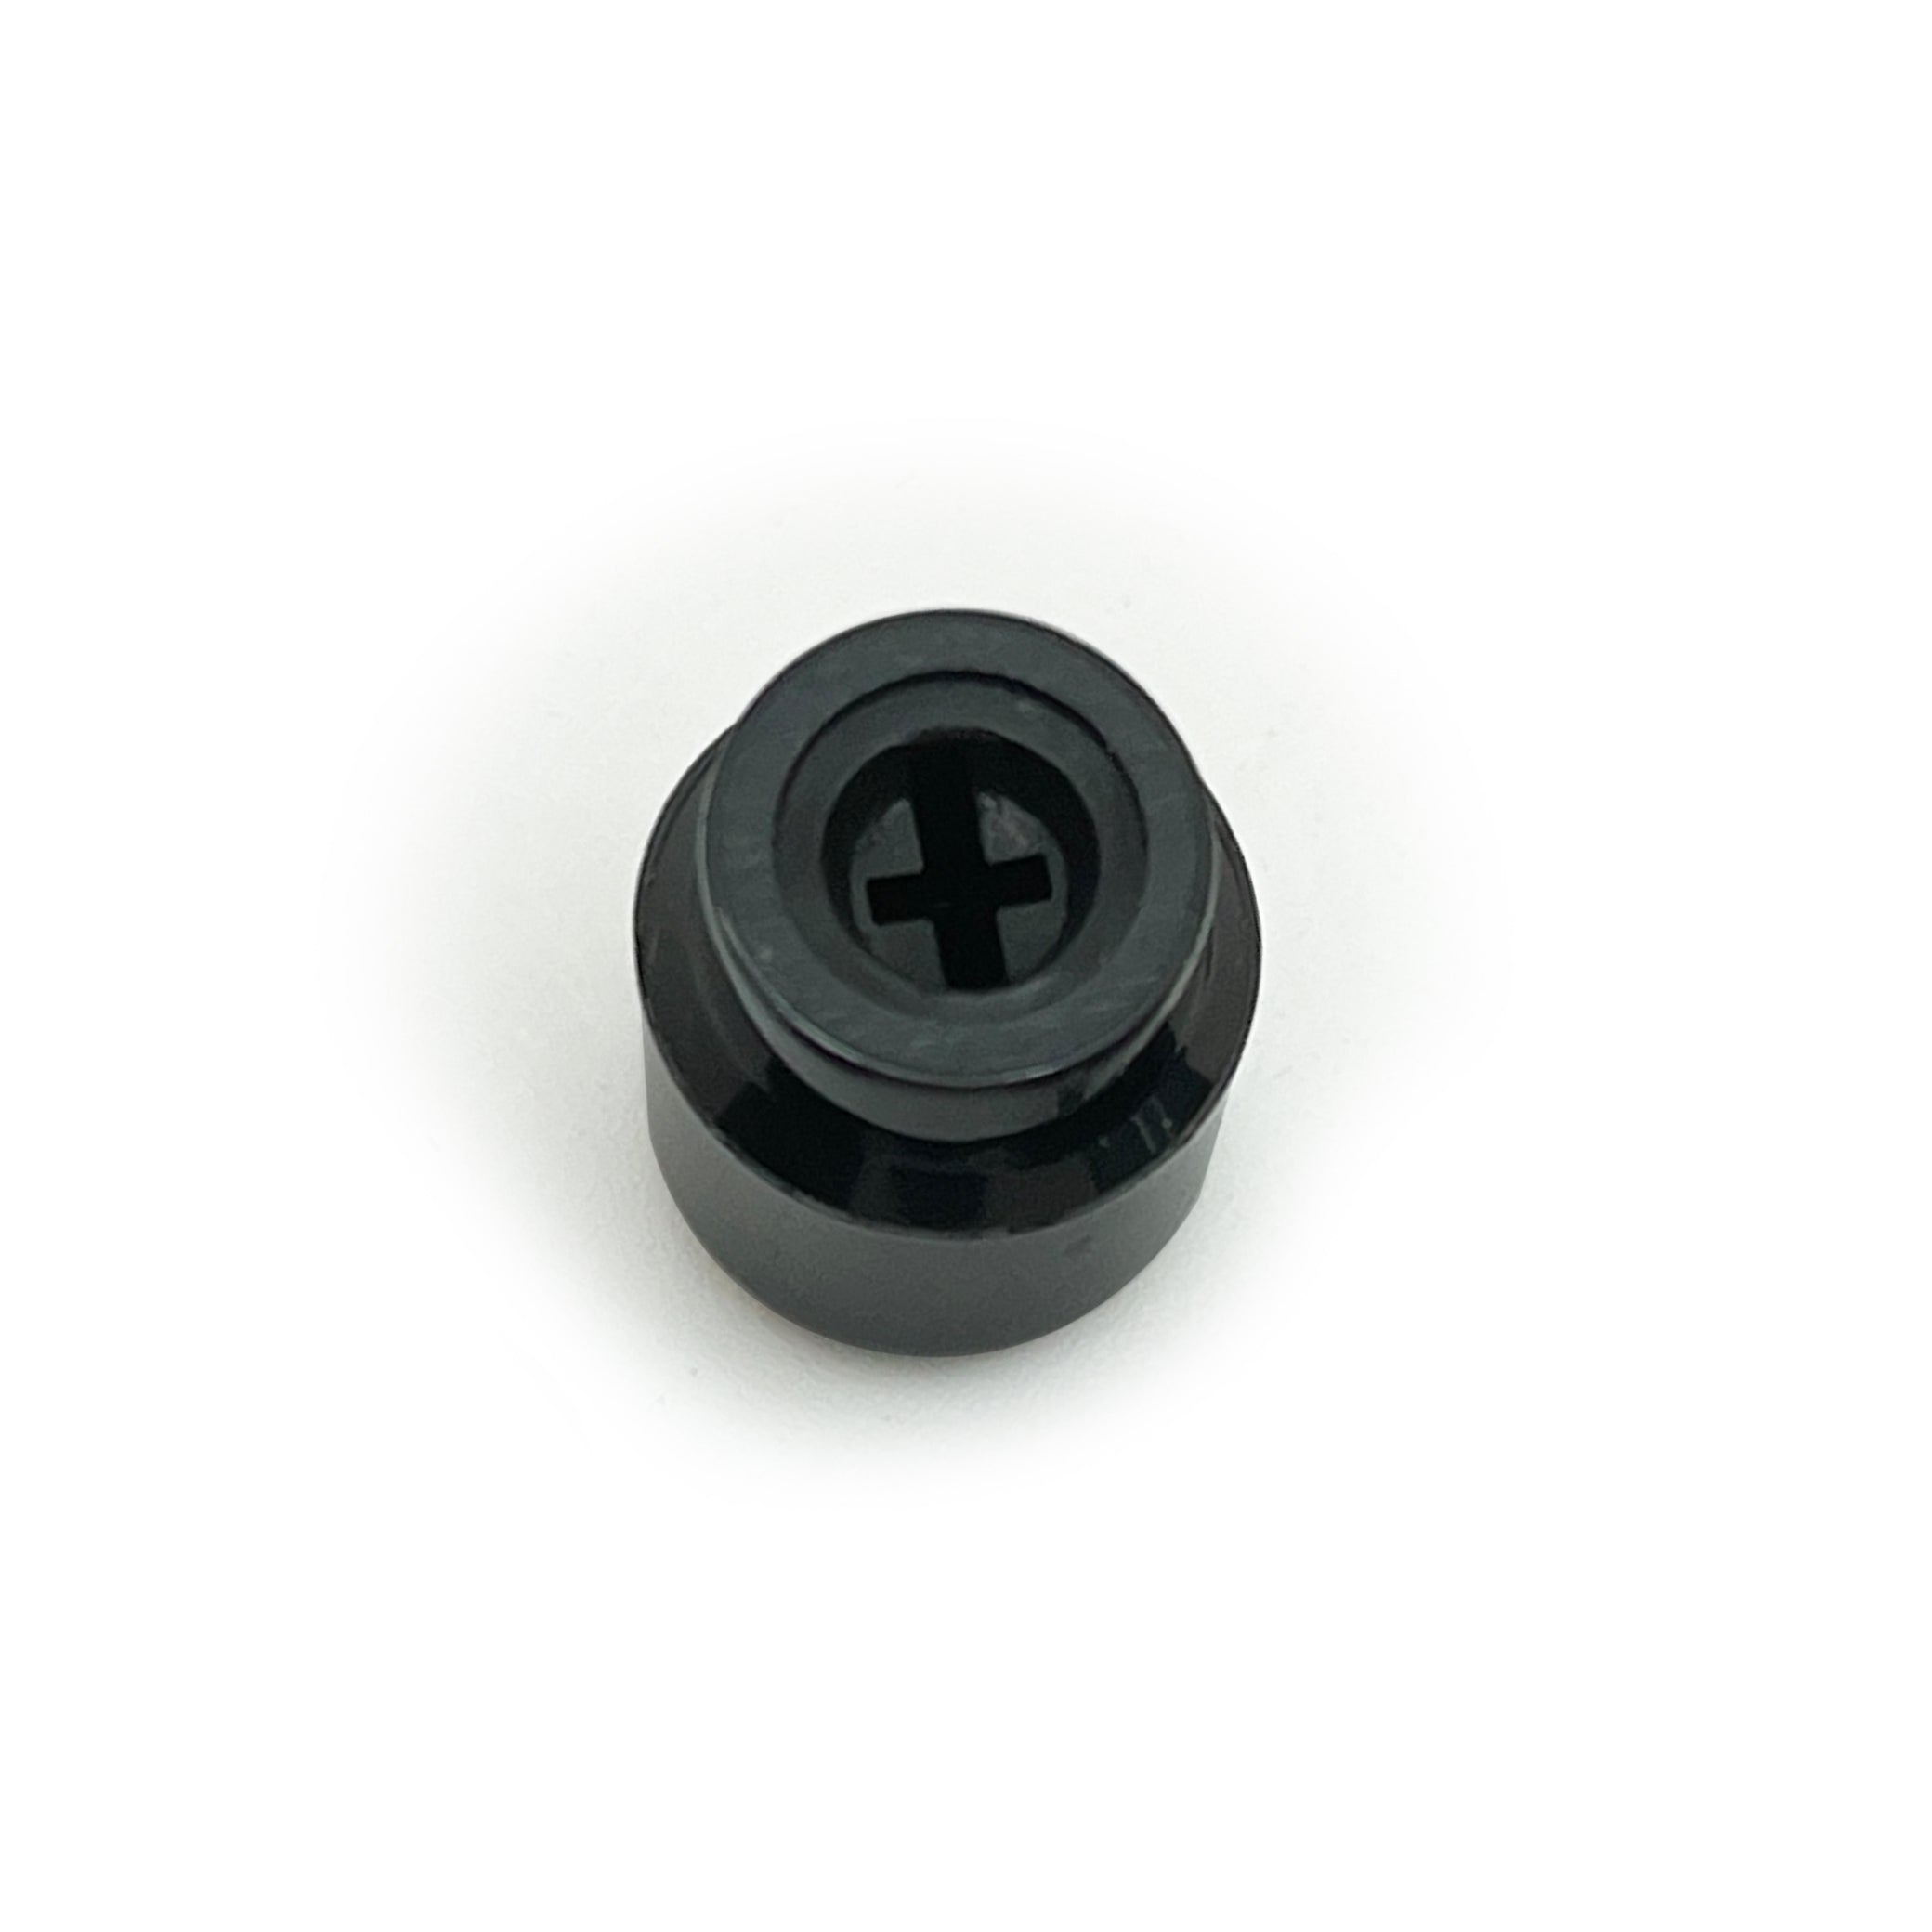 AxLabs Tele®-Style Barrel Switch Tip with Nylon Insert - AxLabs